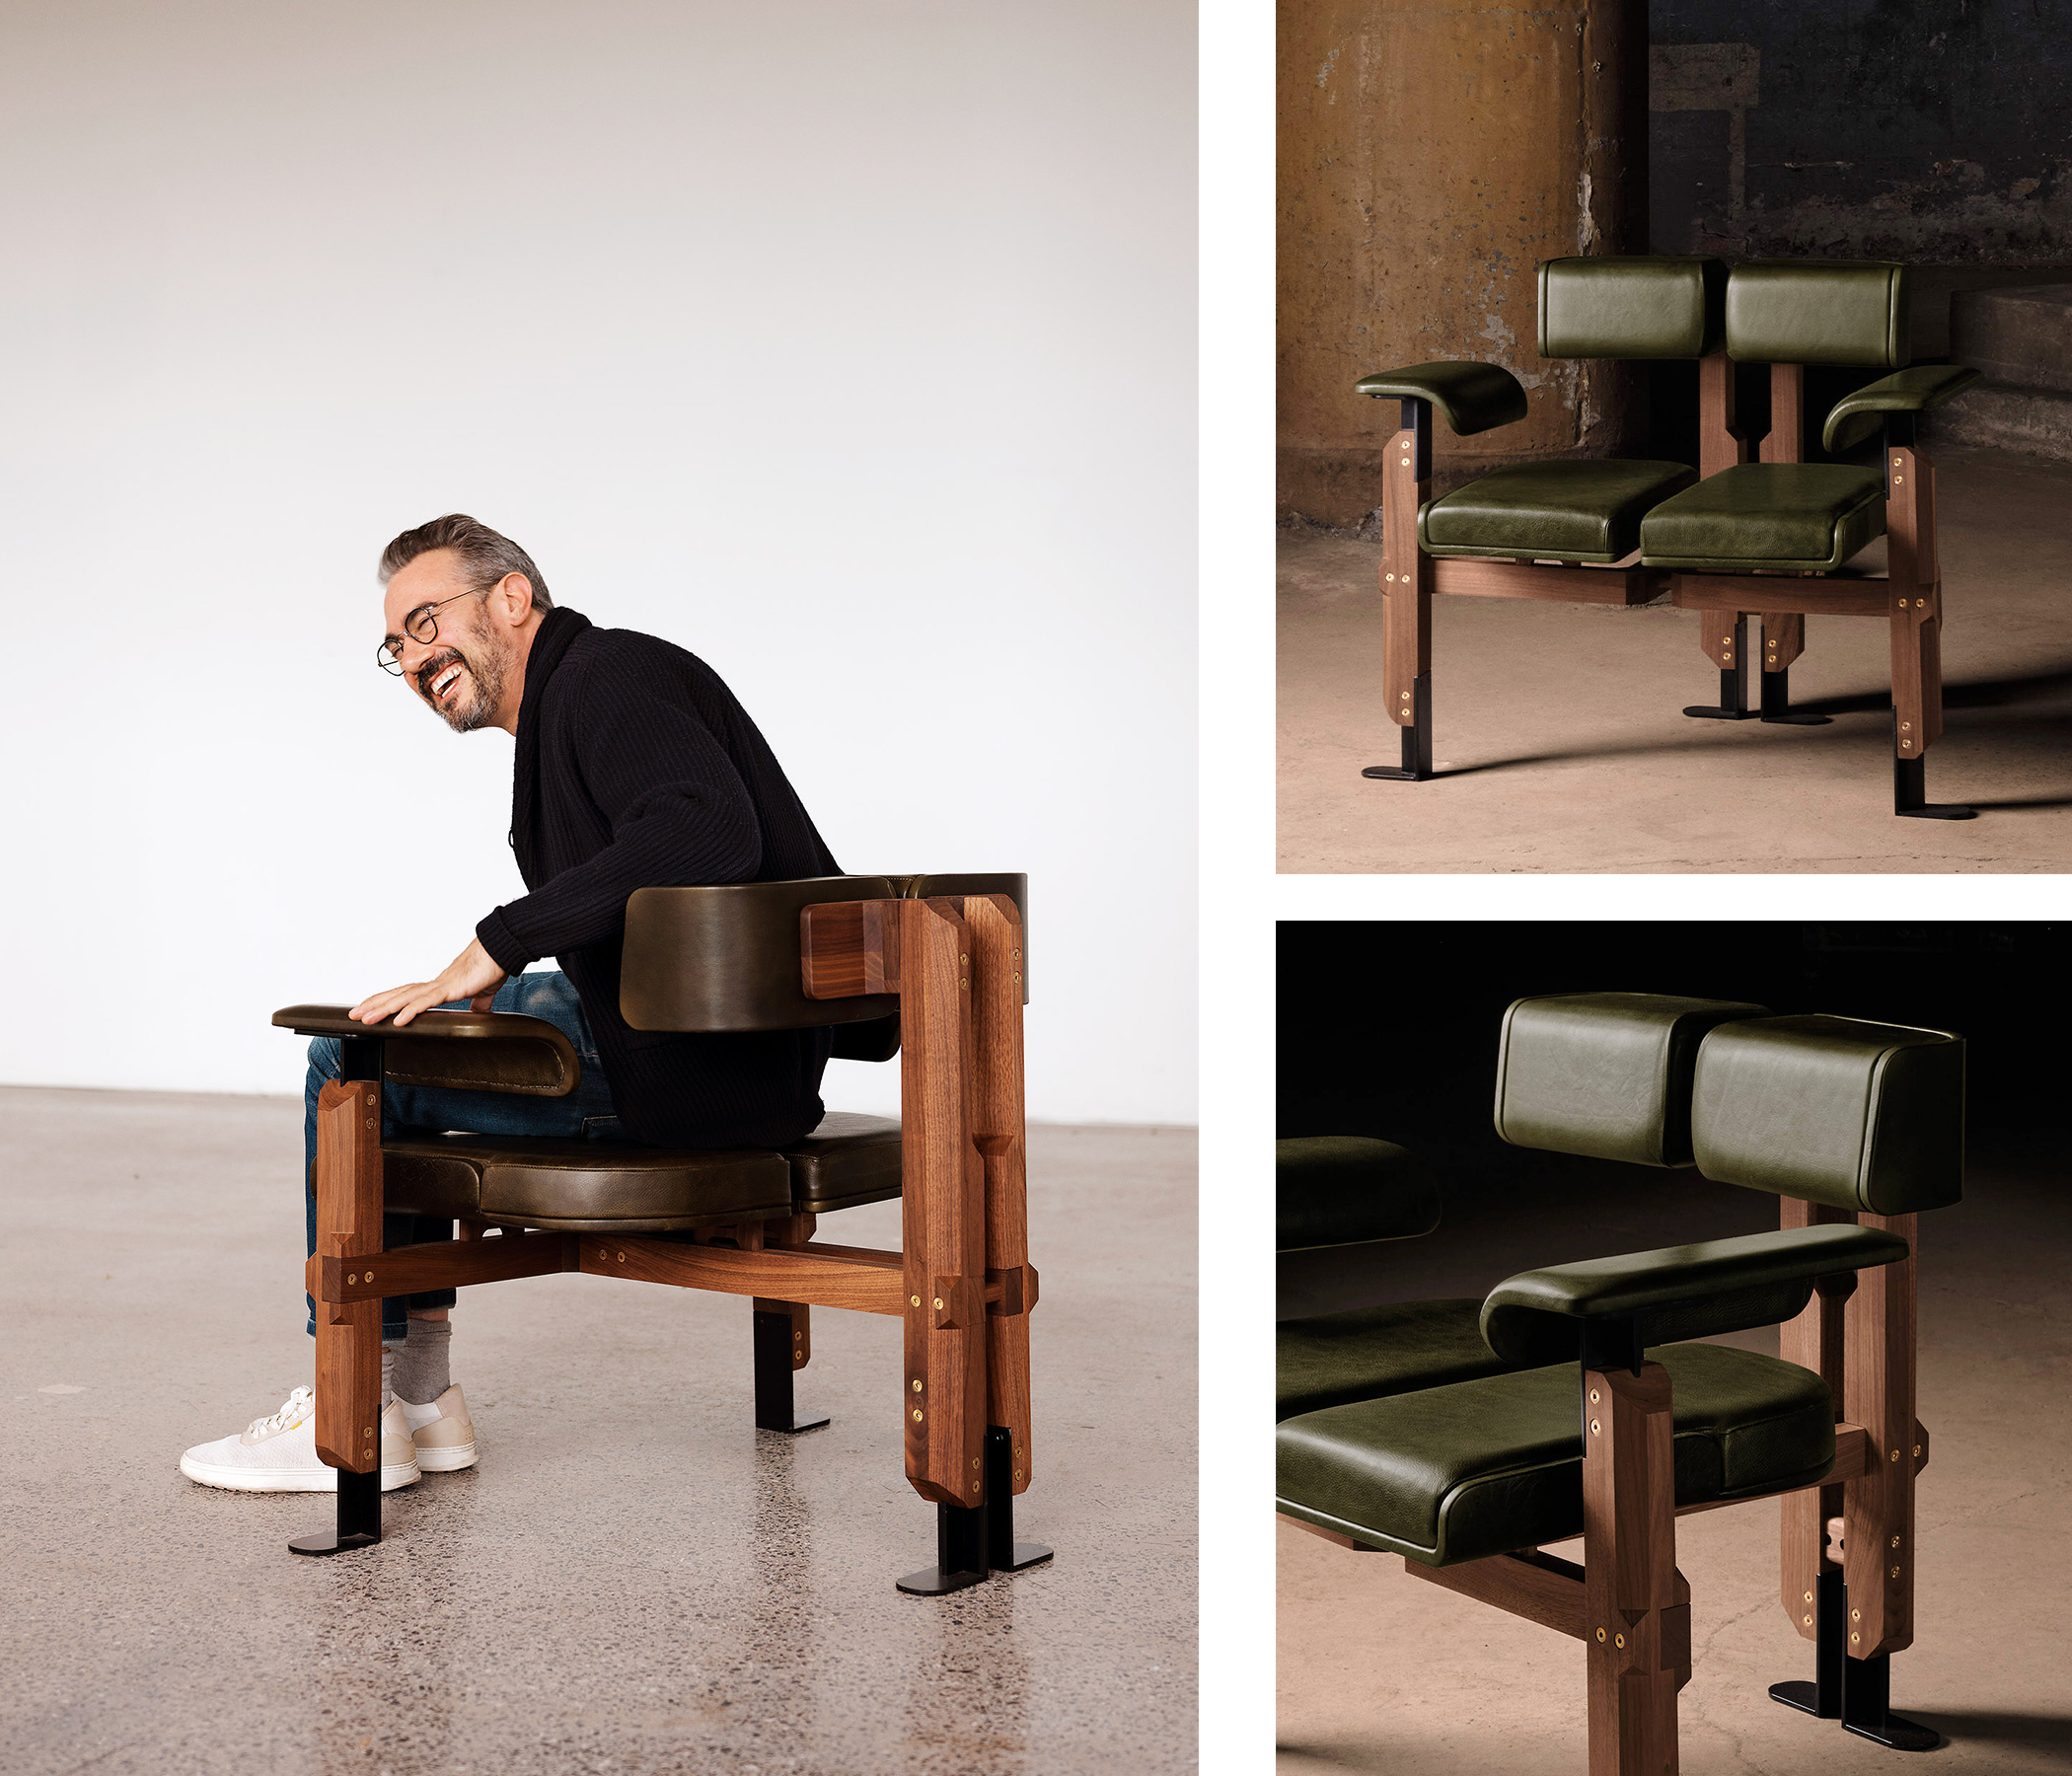  Designer Zébulon Perron and his Spineless Chair